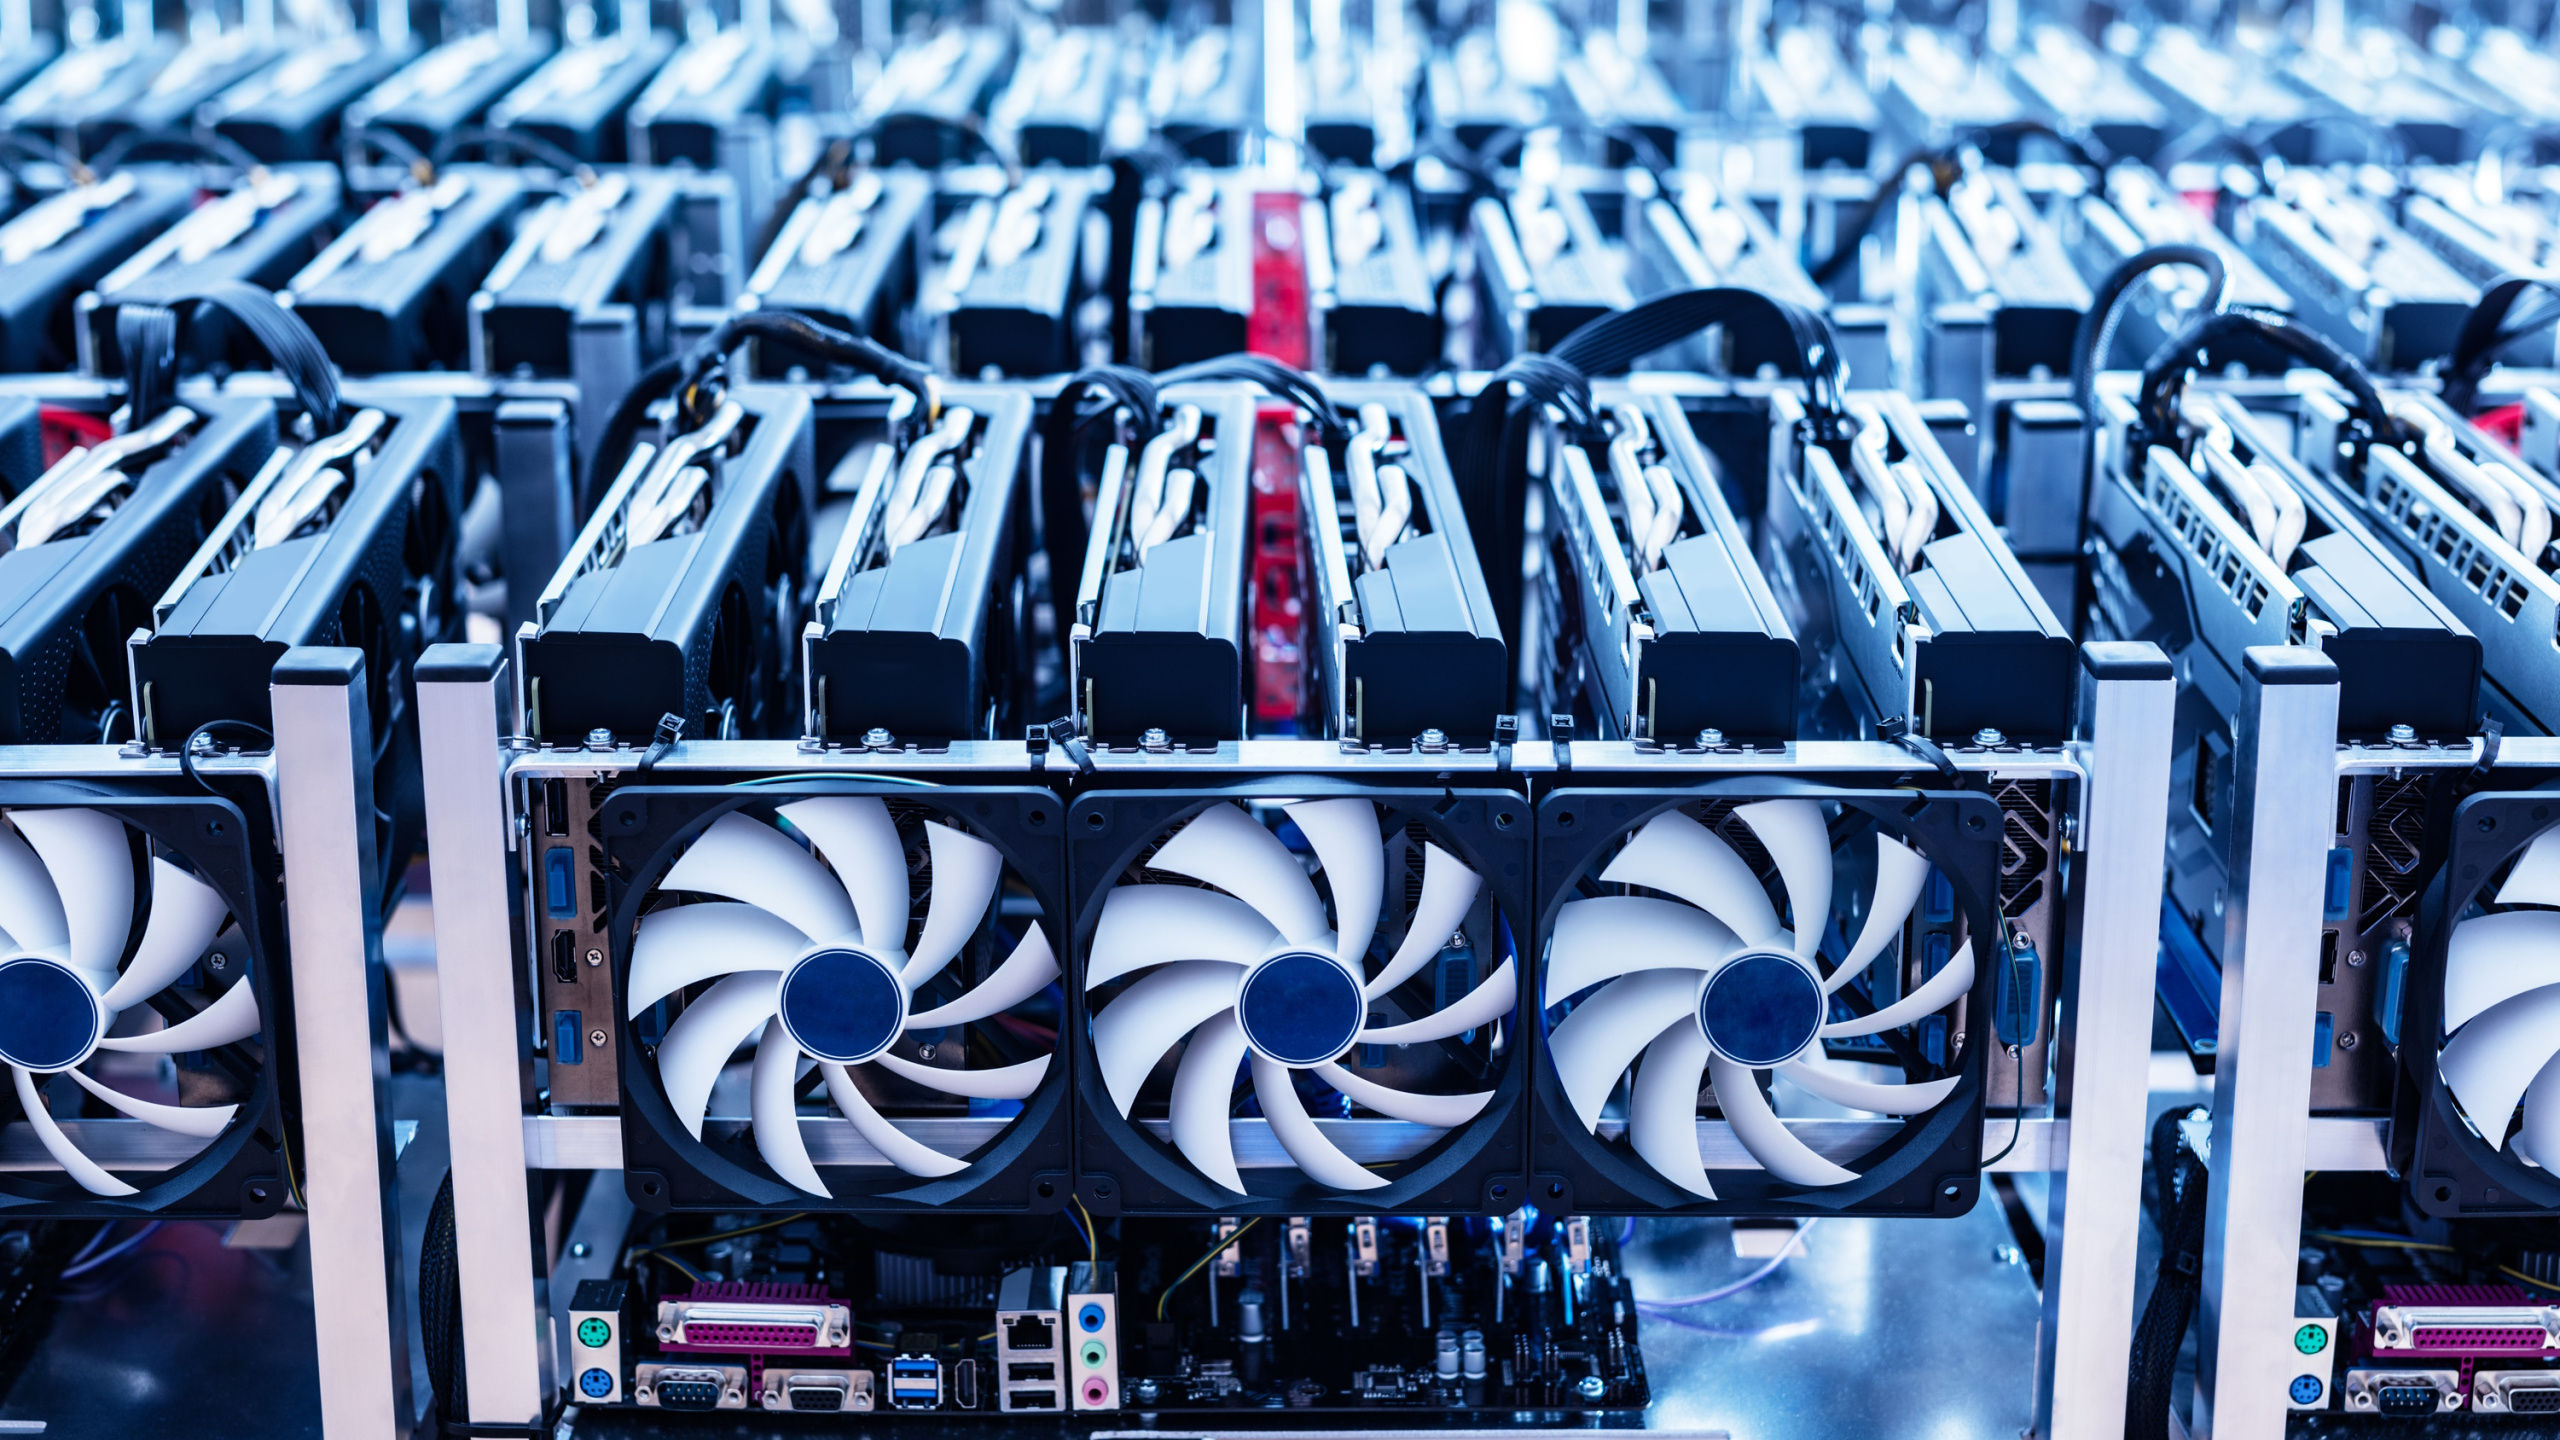 For now, the graphics card market appears to be demonstrating a robust and flourishing state